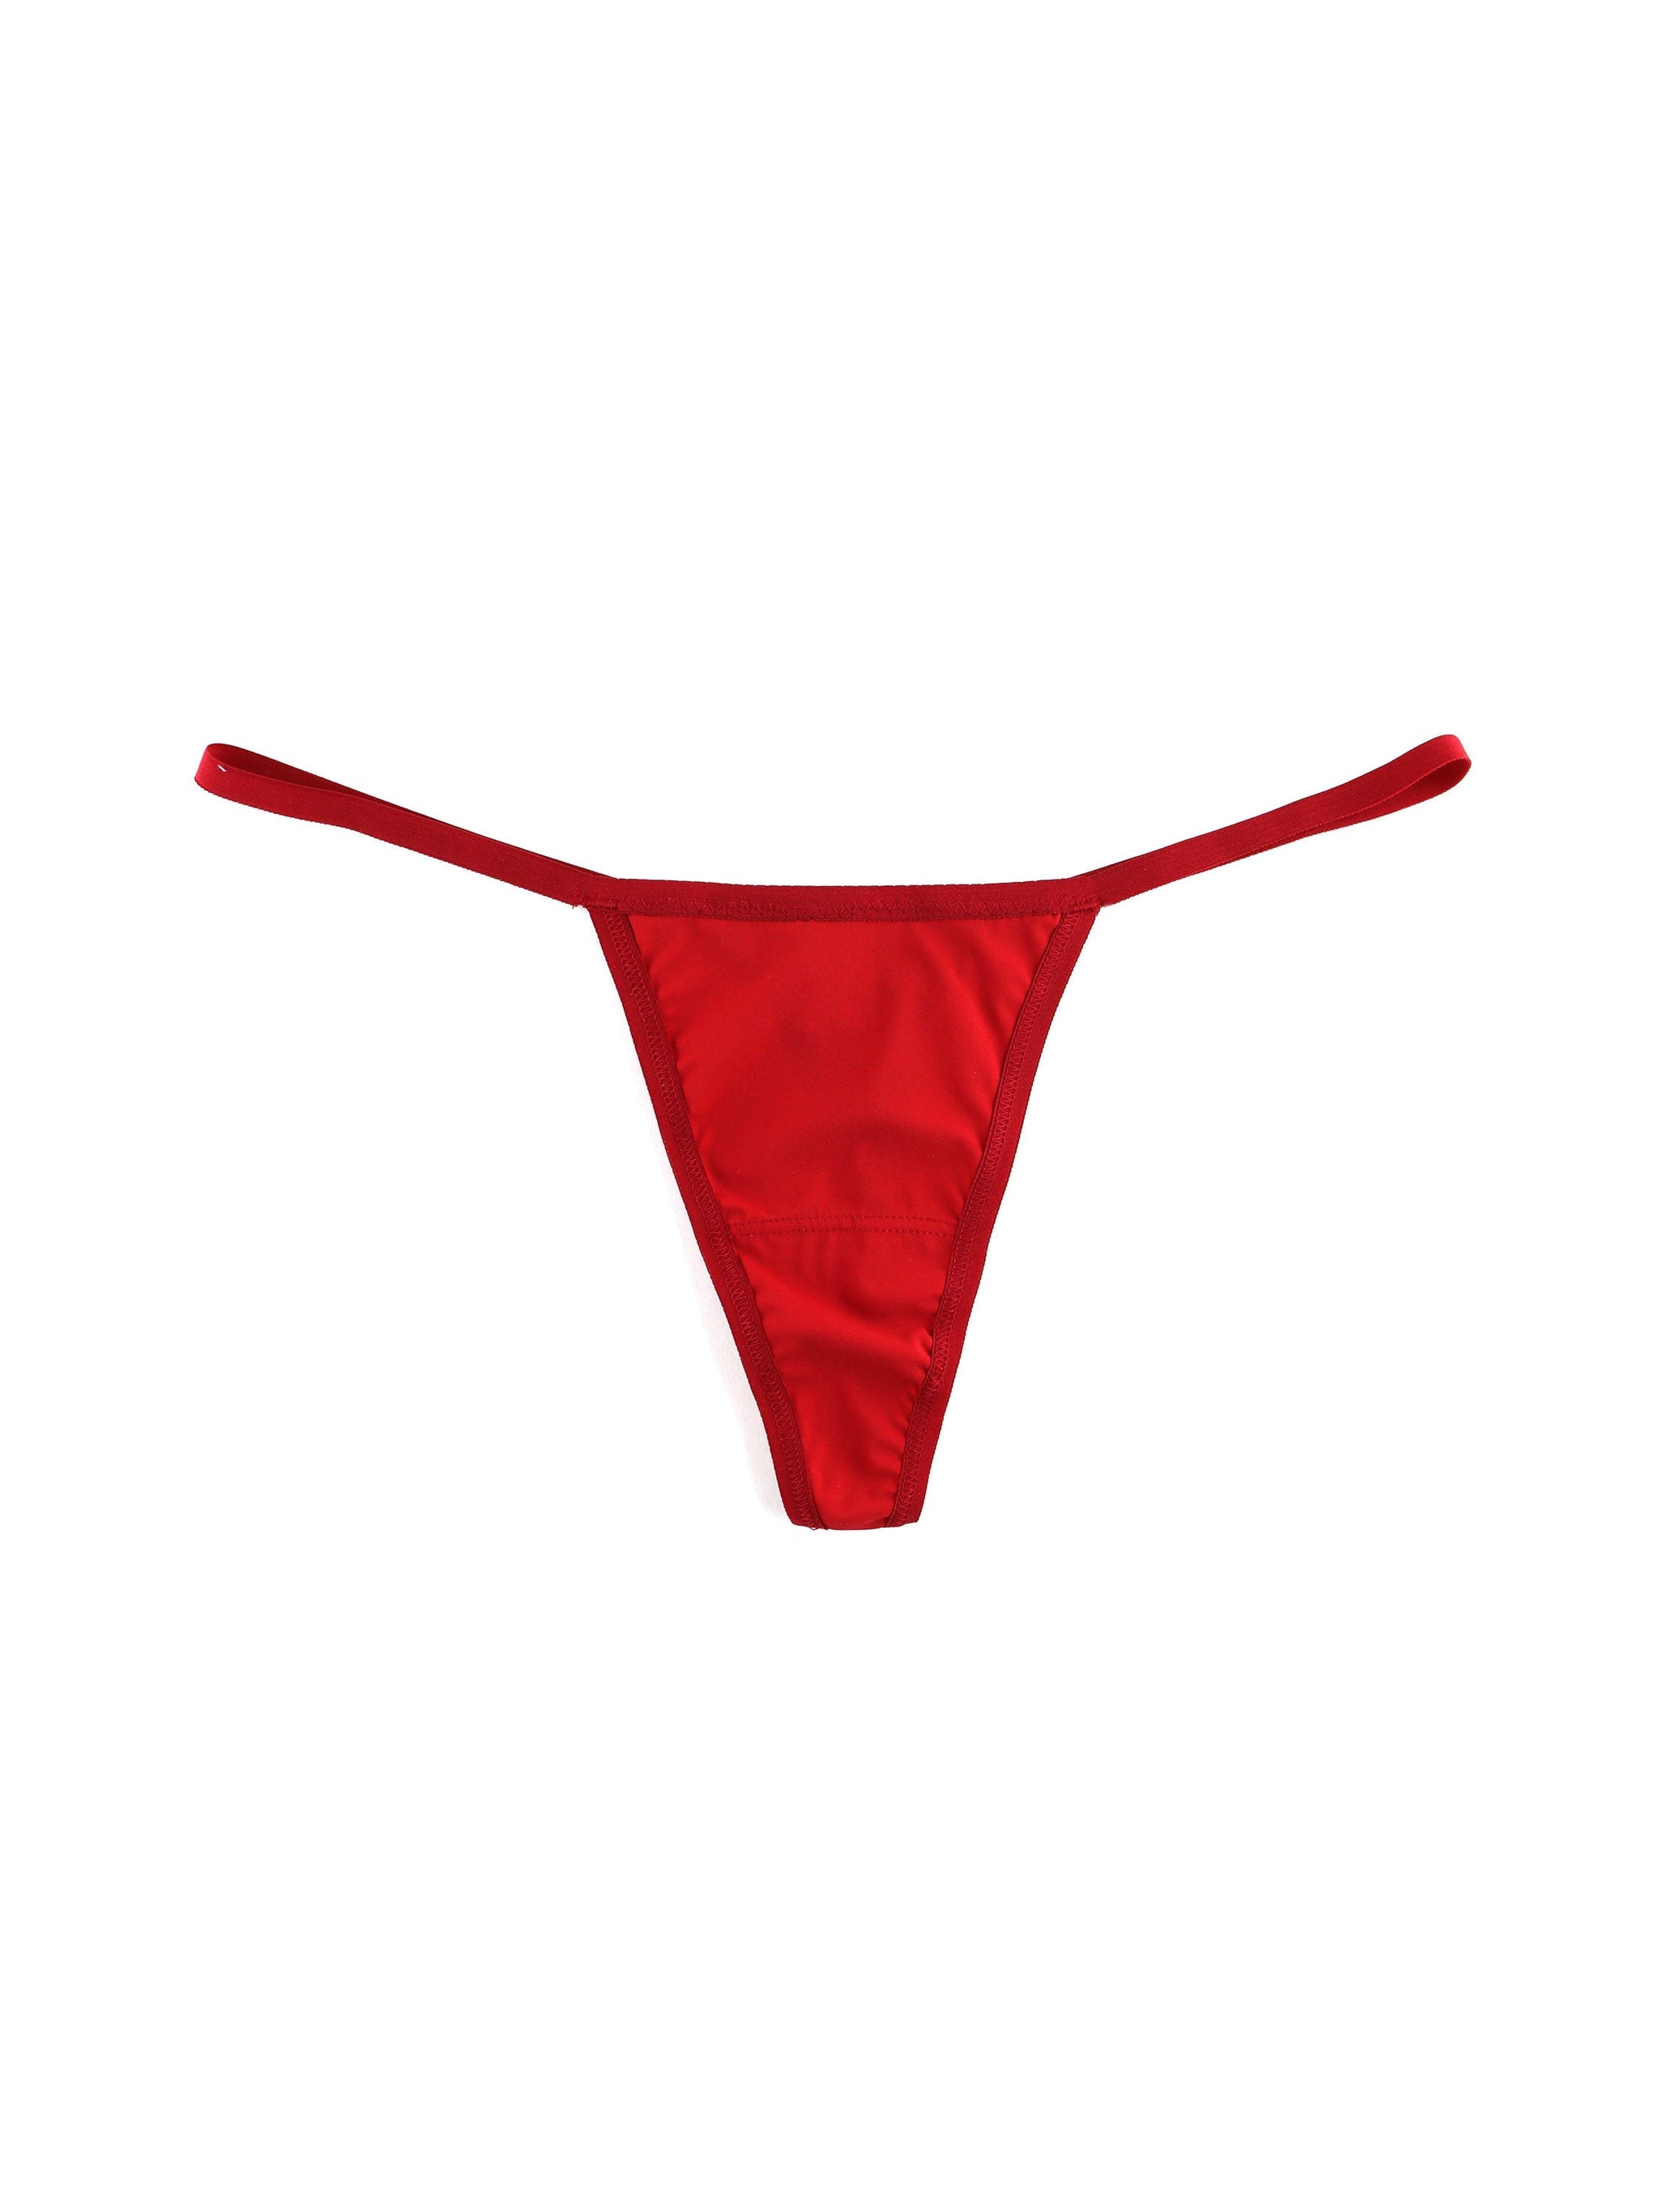 Buy Standard Quality China Wholesale Ladies G-string Sexy Thong